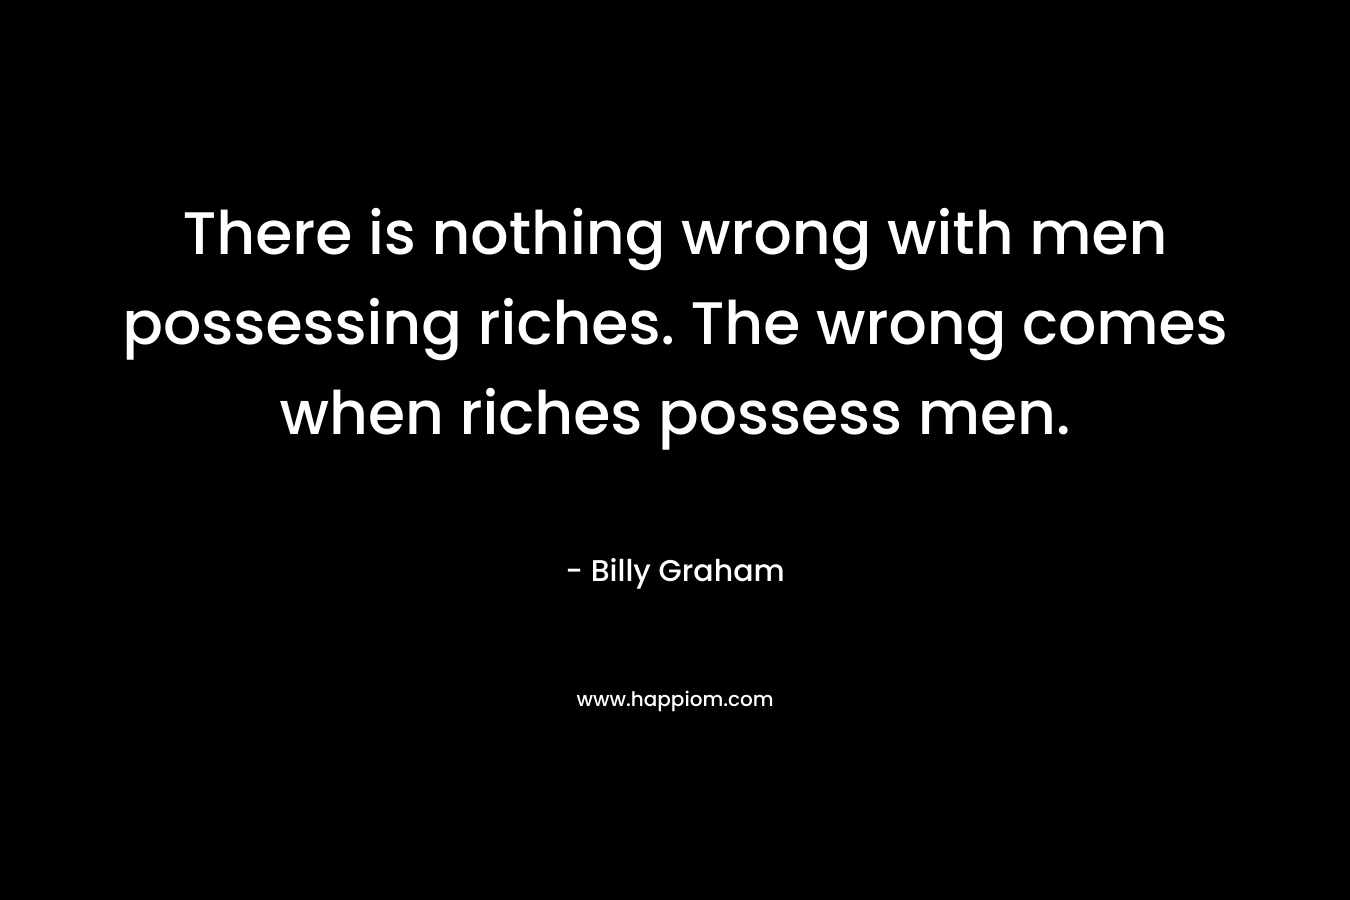 There is nothing wrong with men possessing riches. The wrong comes when riches possess men. – Billy Graham